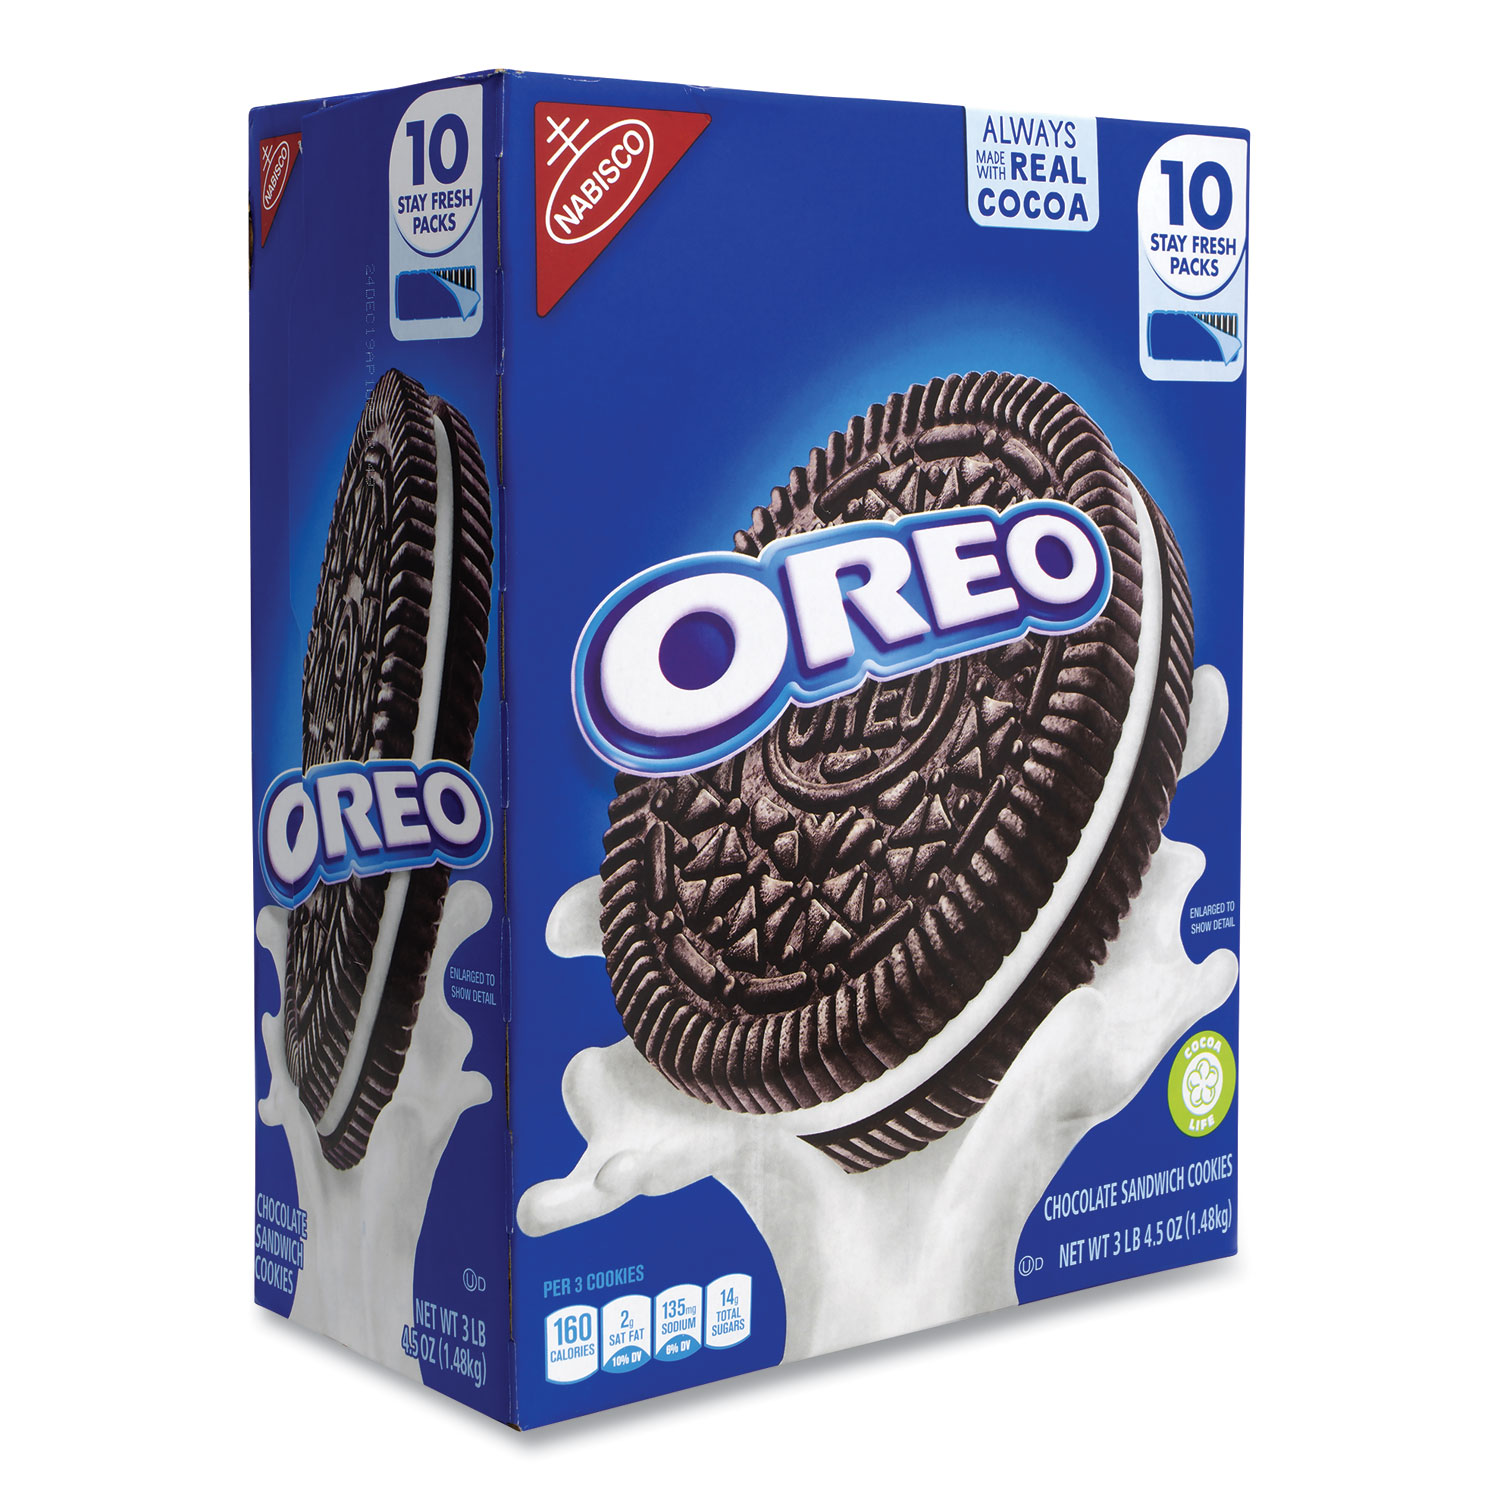  Nabisco 2822 Oreo Chocolate Sandwich Cookies, 5.25 oz Pouch, 10 Pouches/Box, Free Delivery in 1-4 Business Days (GRR22000417) 